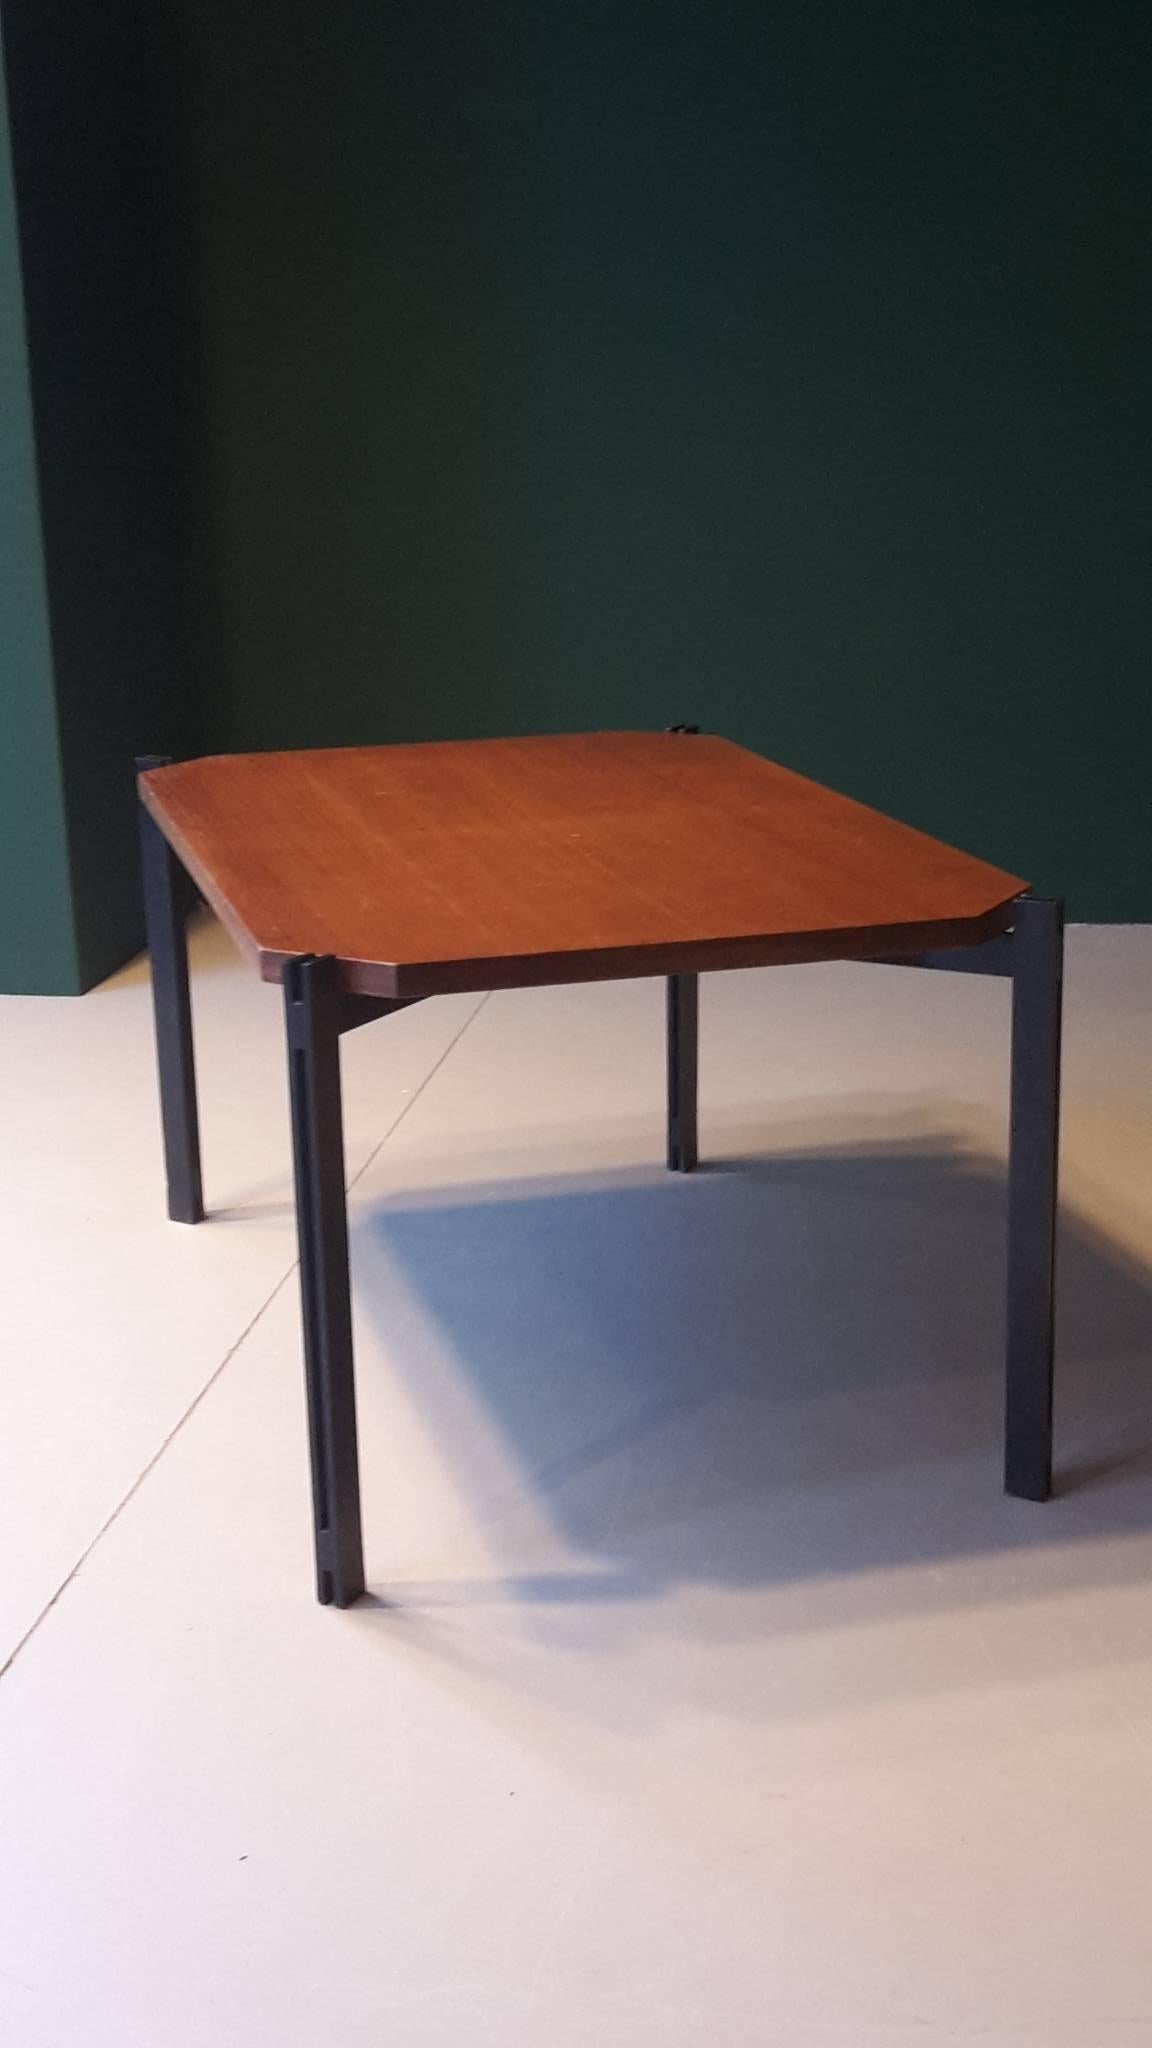 20th century, Italian coffee table made of teak and metal from the 1960s.